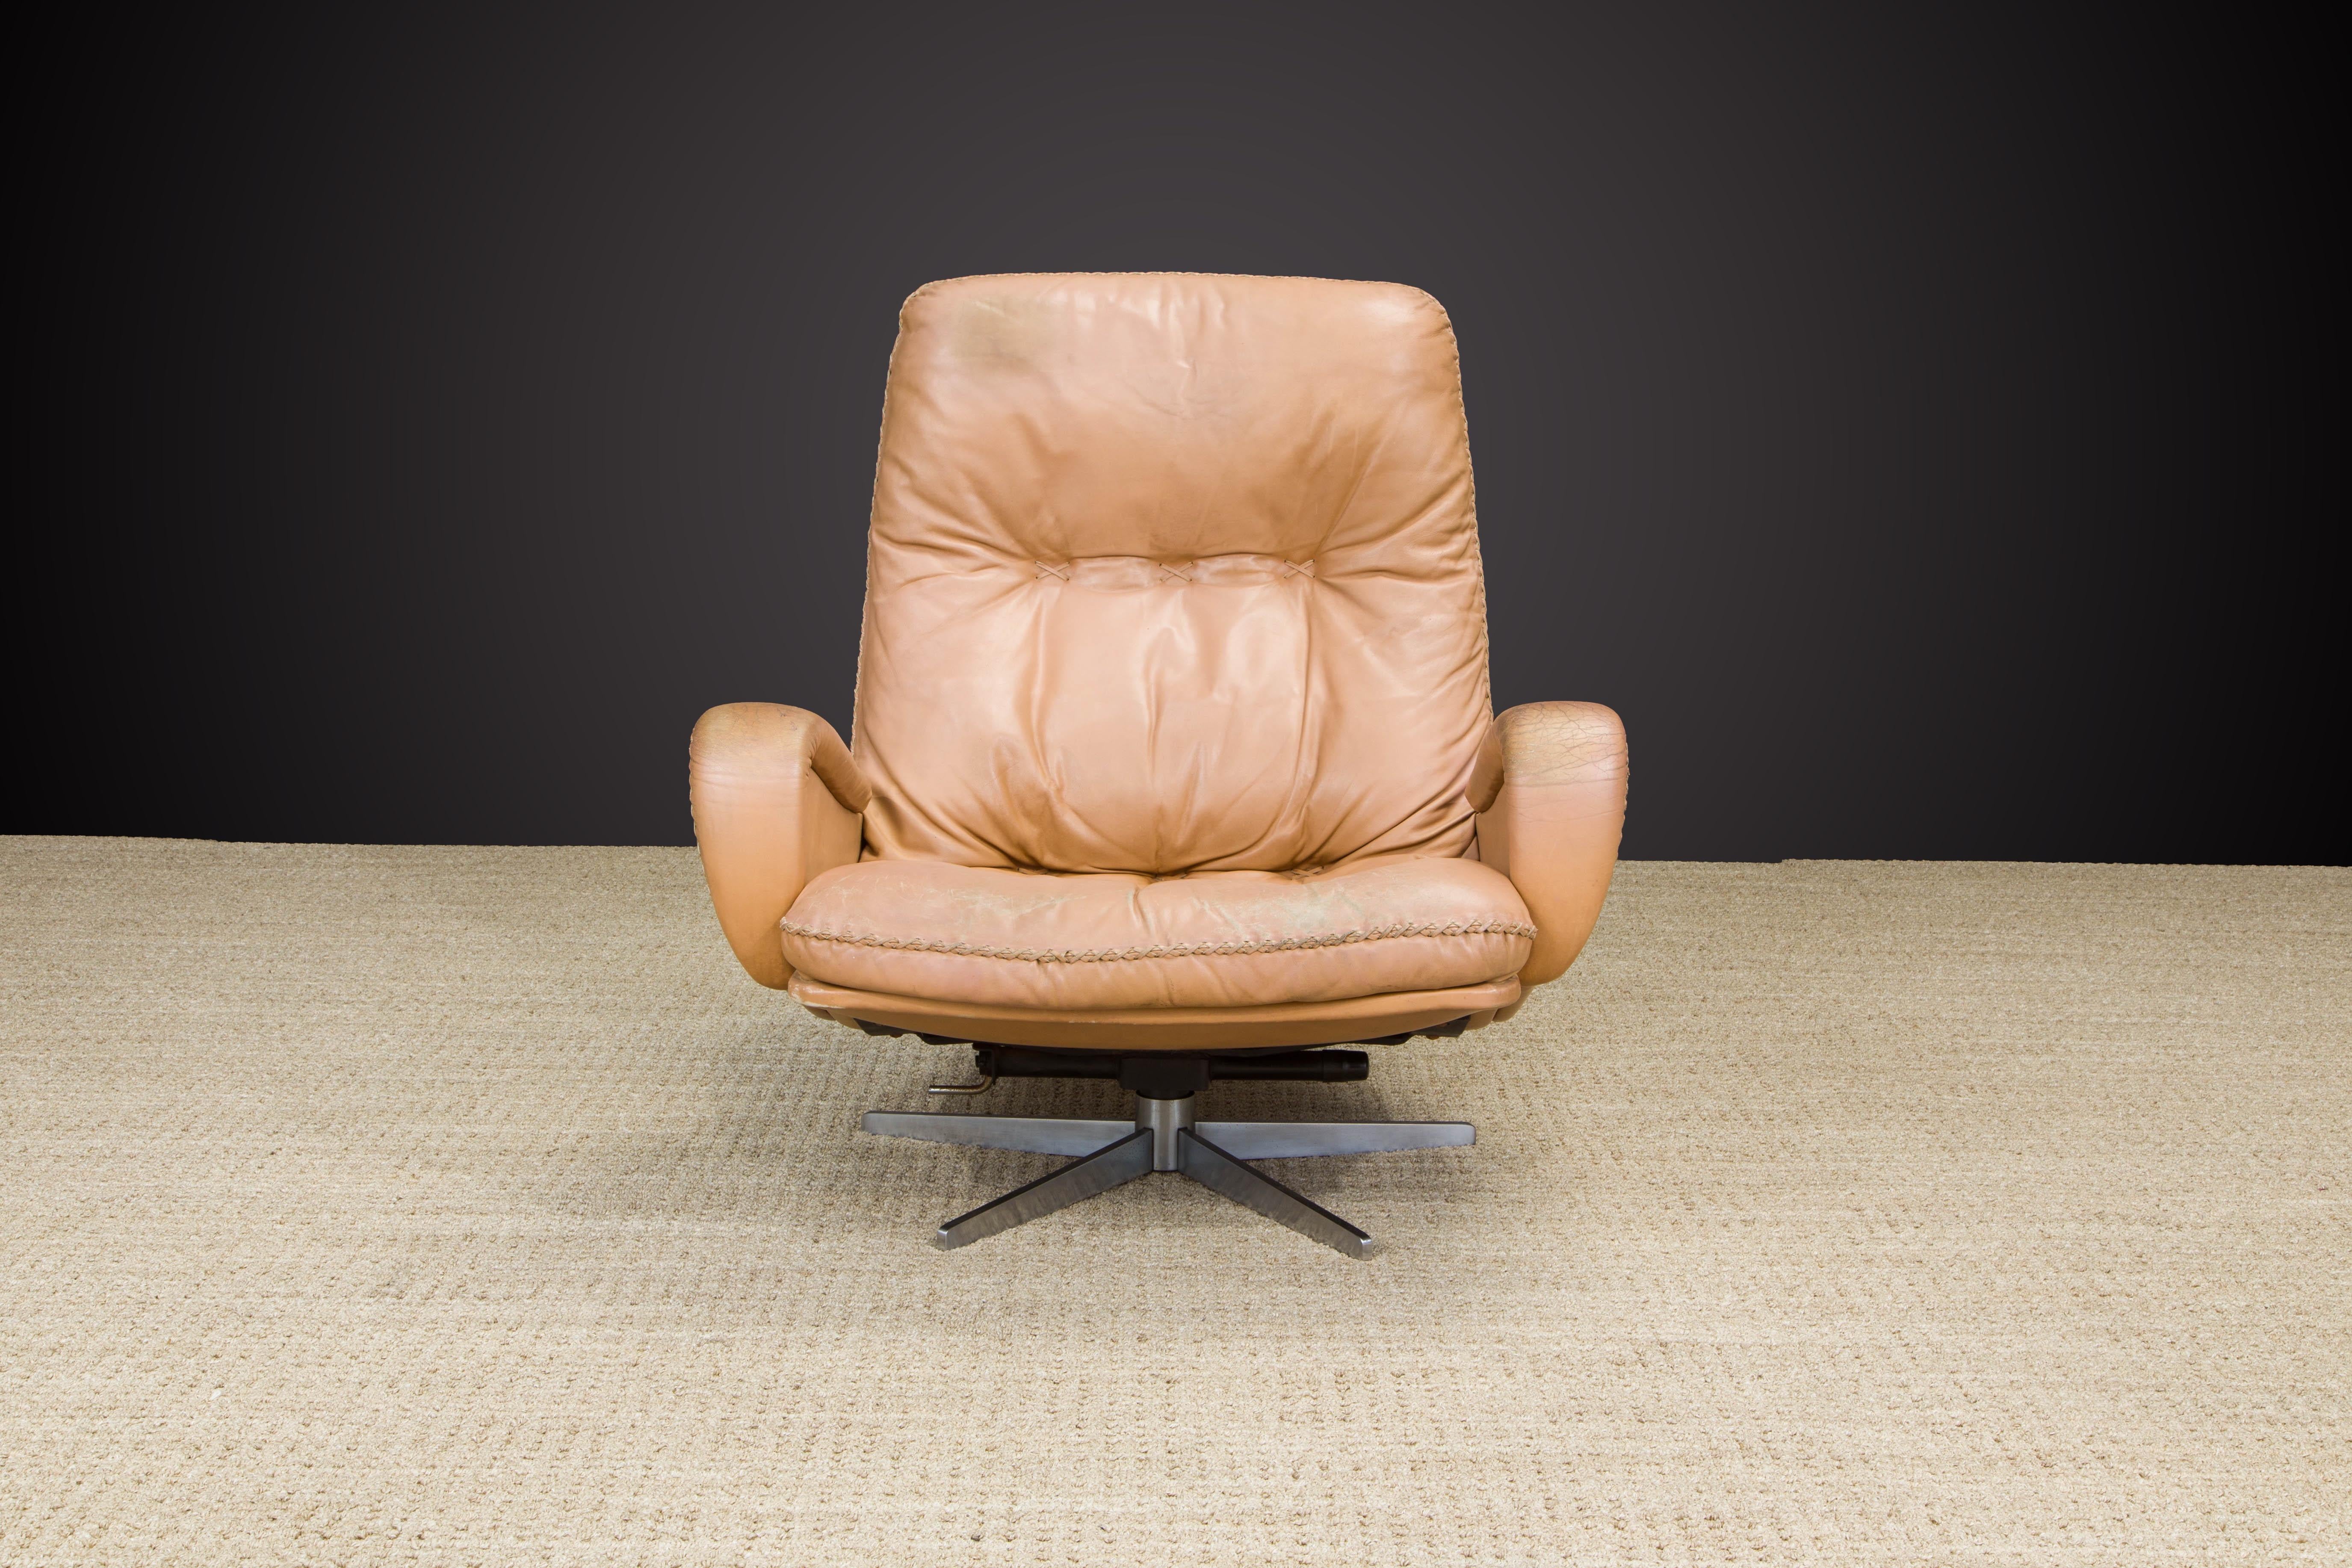 A rare and incredibly laid-back comfortable De Sede S 231 James Bond high-back swivel lounge armchair in an attractive lightly distressed tan leather with thick leather stitching similar to a baseball glove, designed and produced in the 1960s in